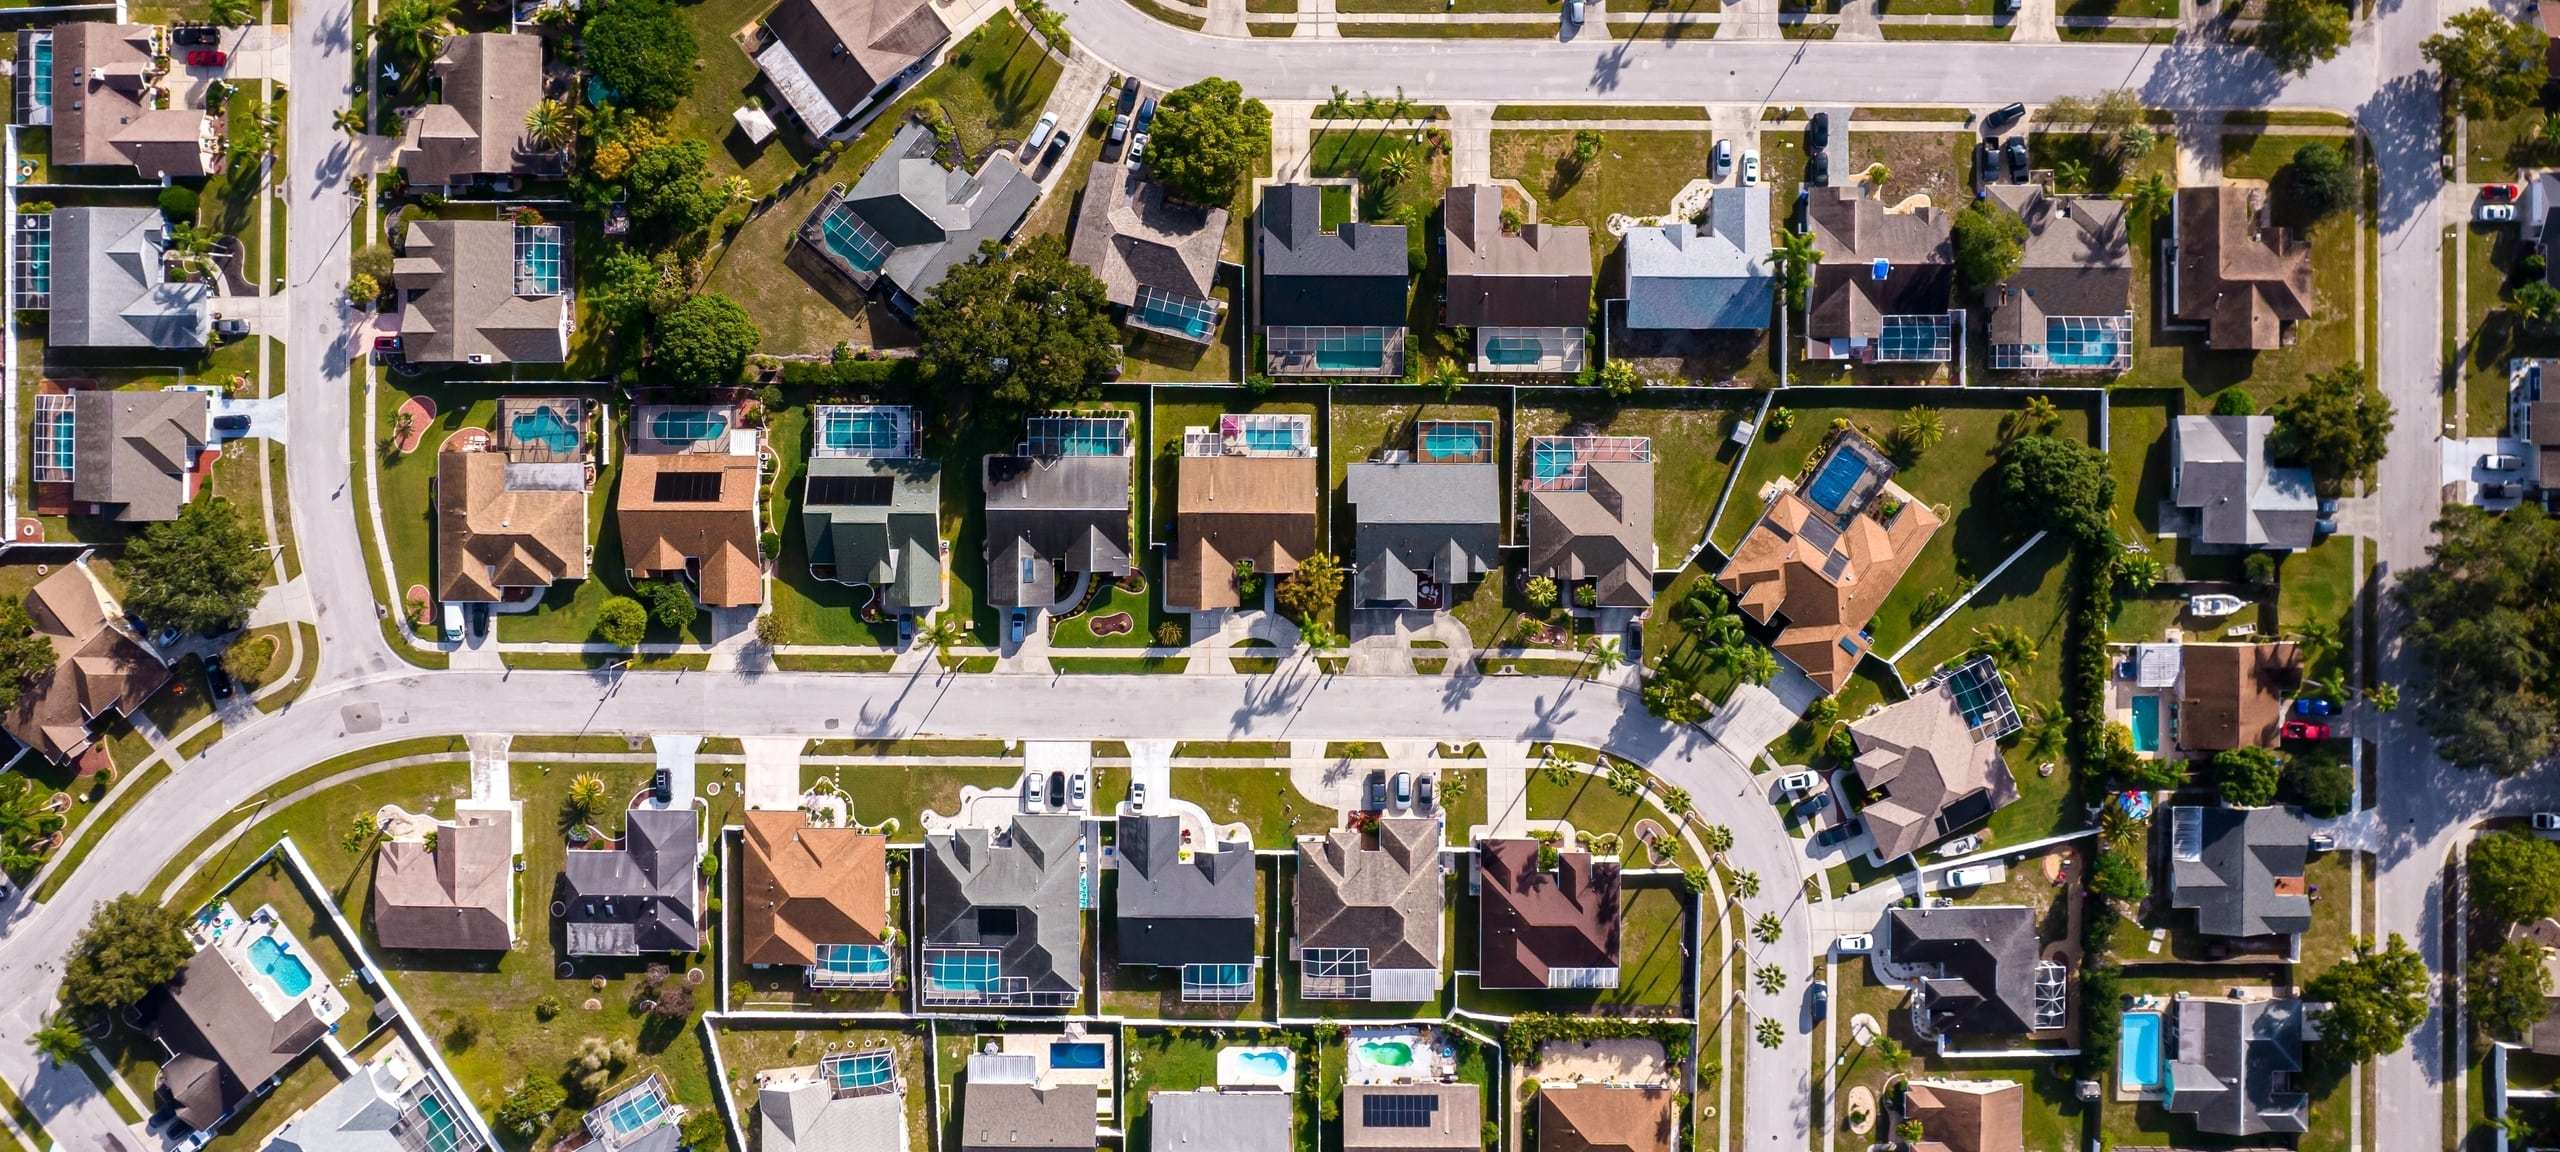 Aerial view of residential neighborhood, typical of outside of Orlando, FL